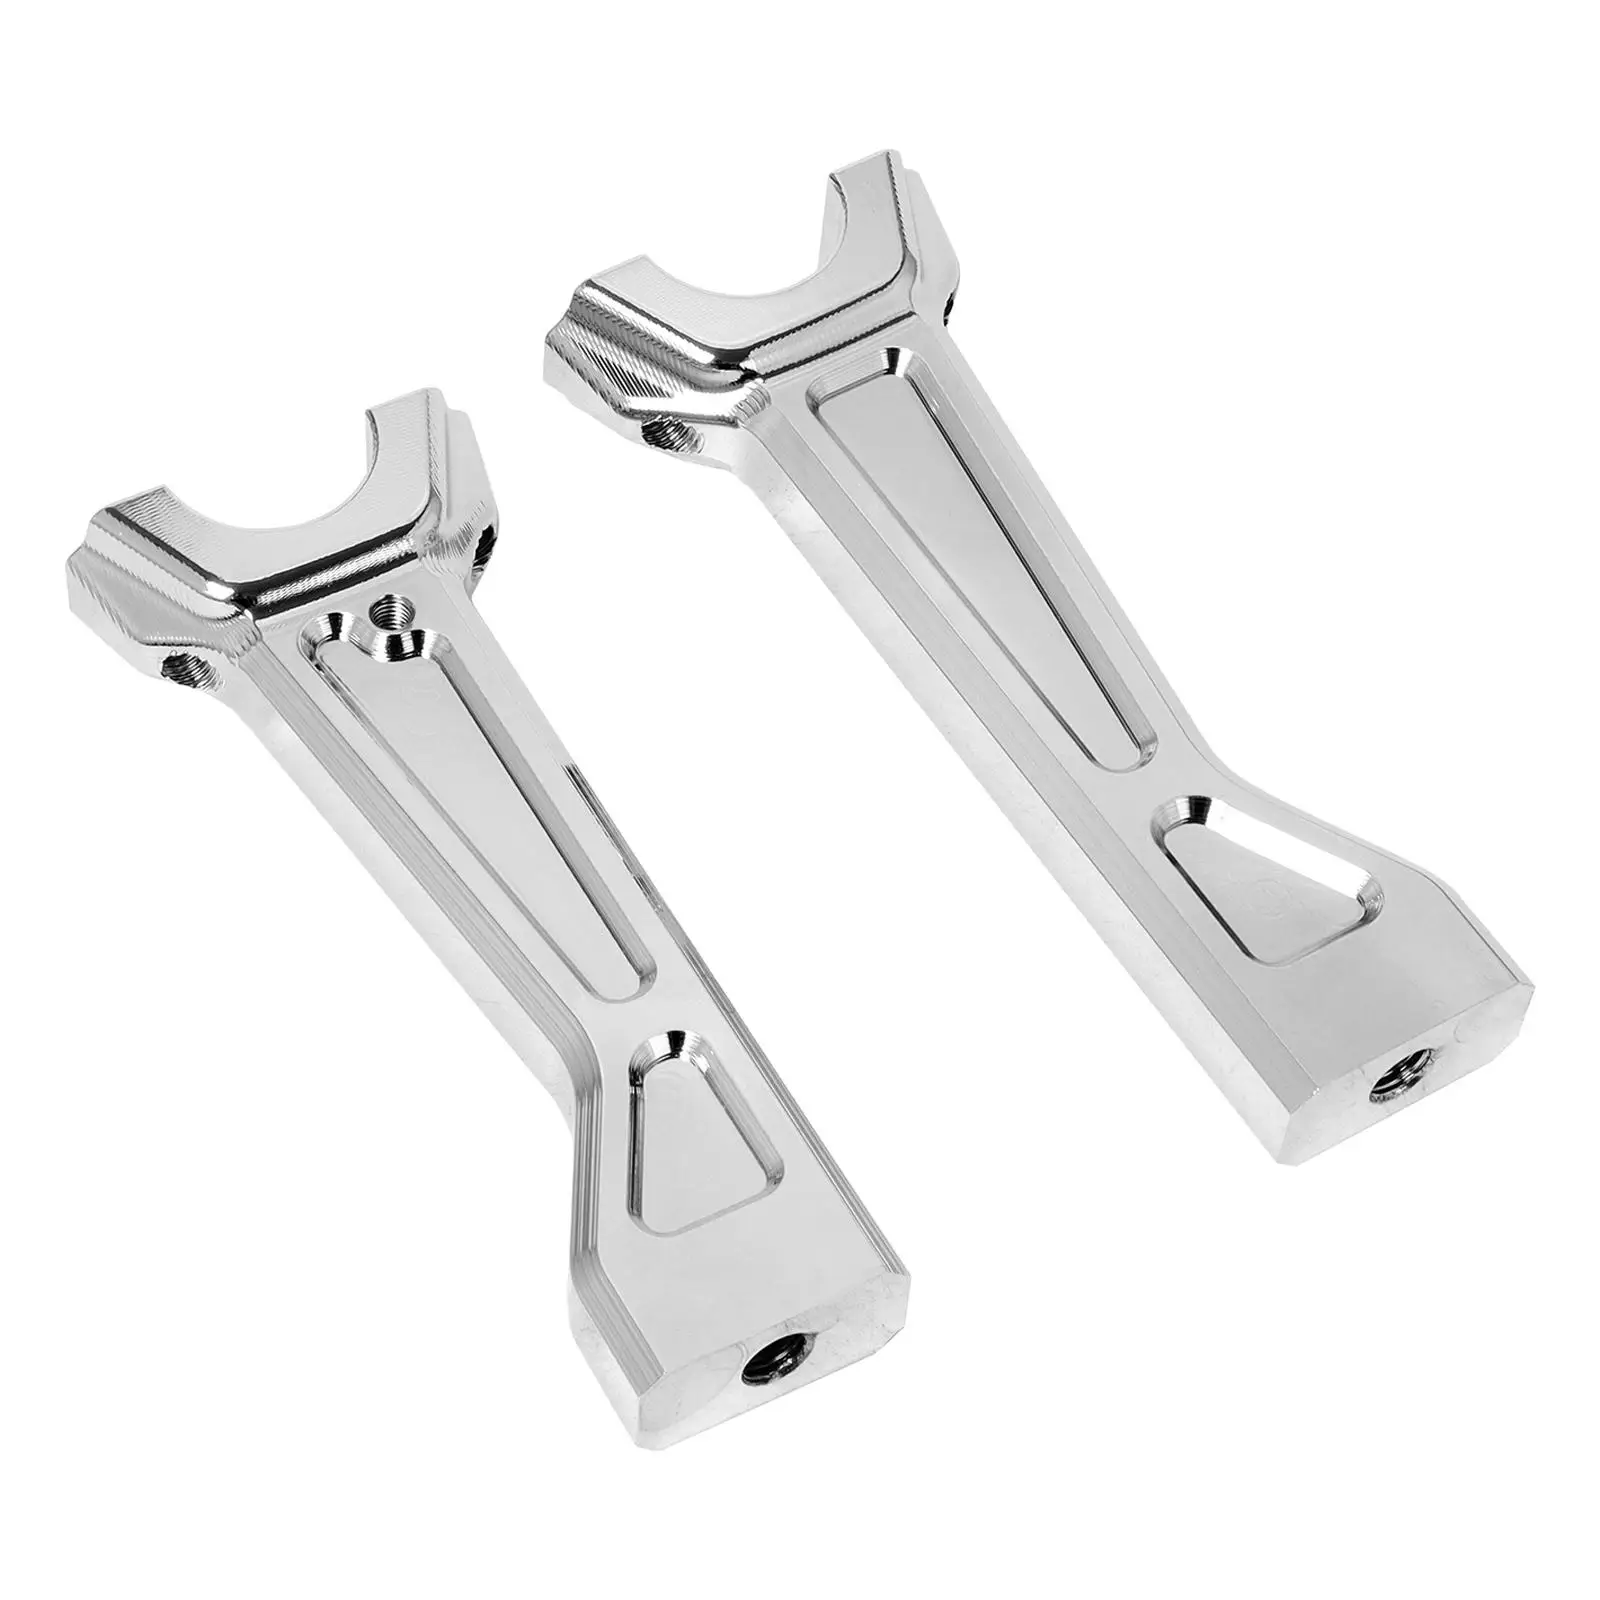 2 Count Motorbike Handlebar Tall Risers for 1250 S PA1250 Improves Comfort